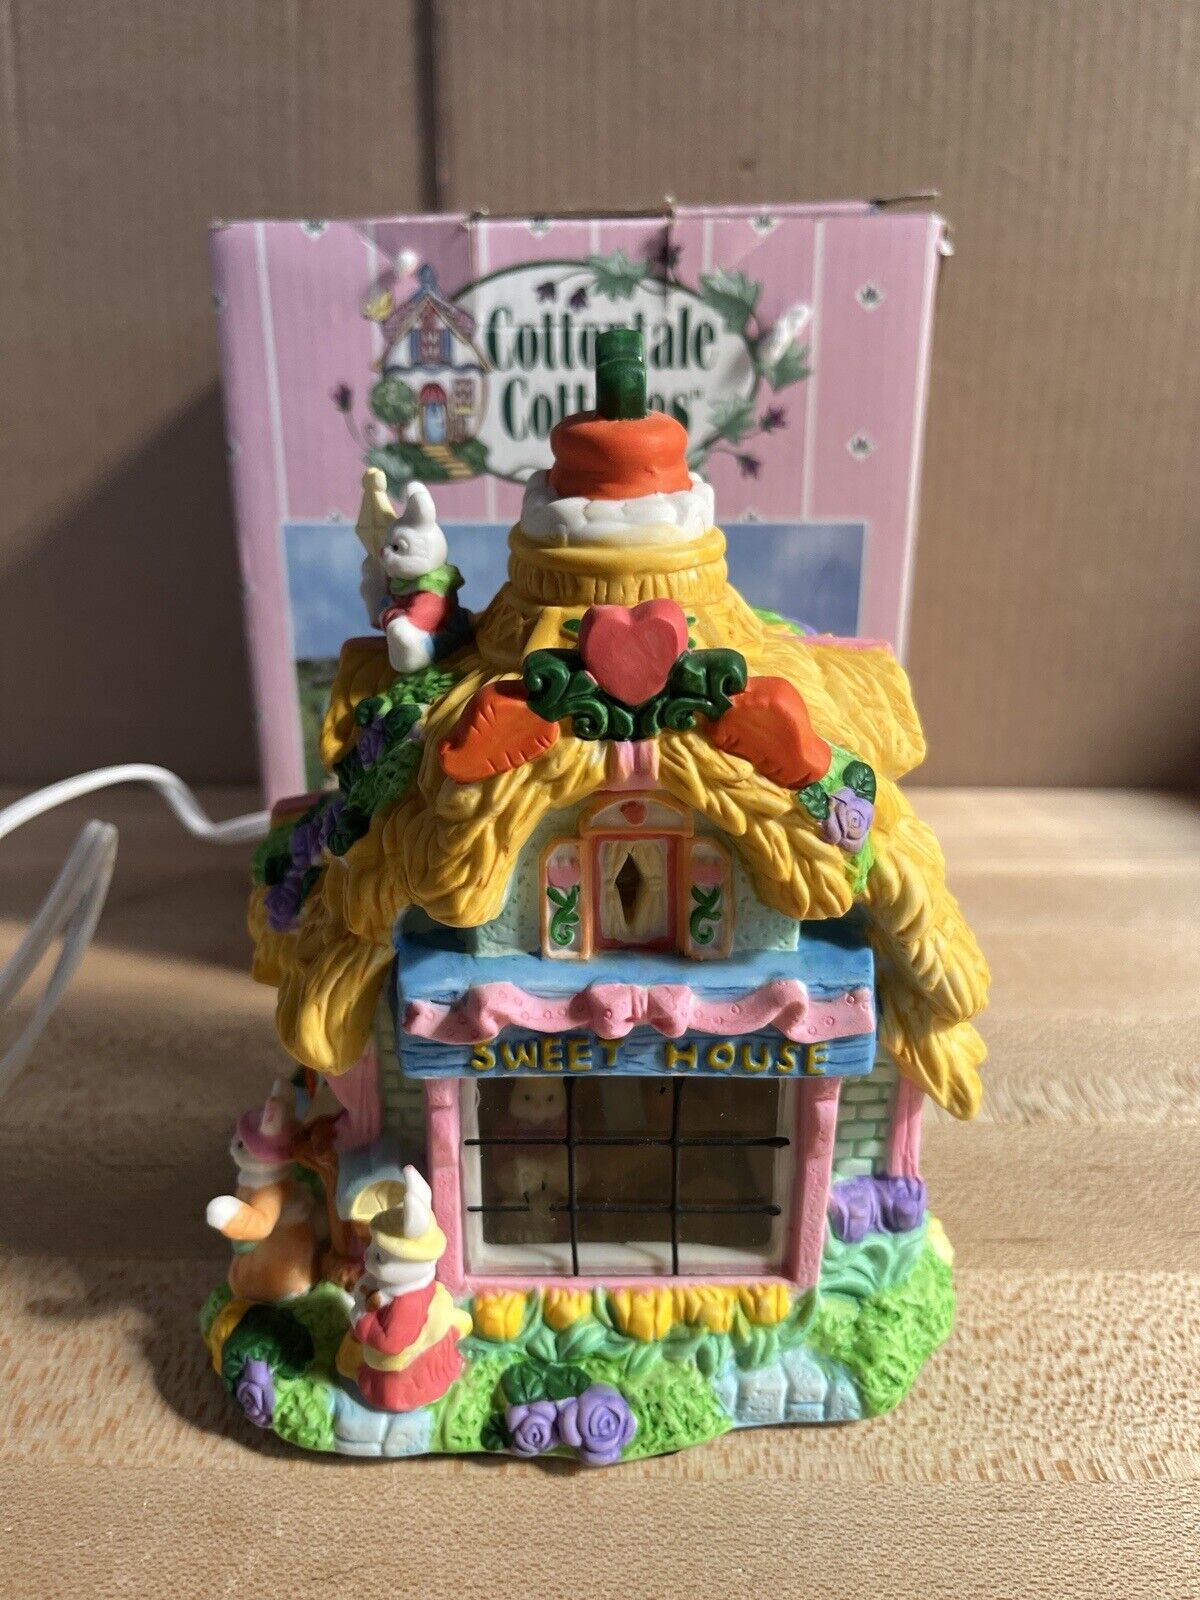 Cottontale Cottages Porcelain Home Sweet House In Original Box.Light Working